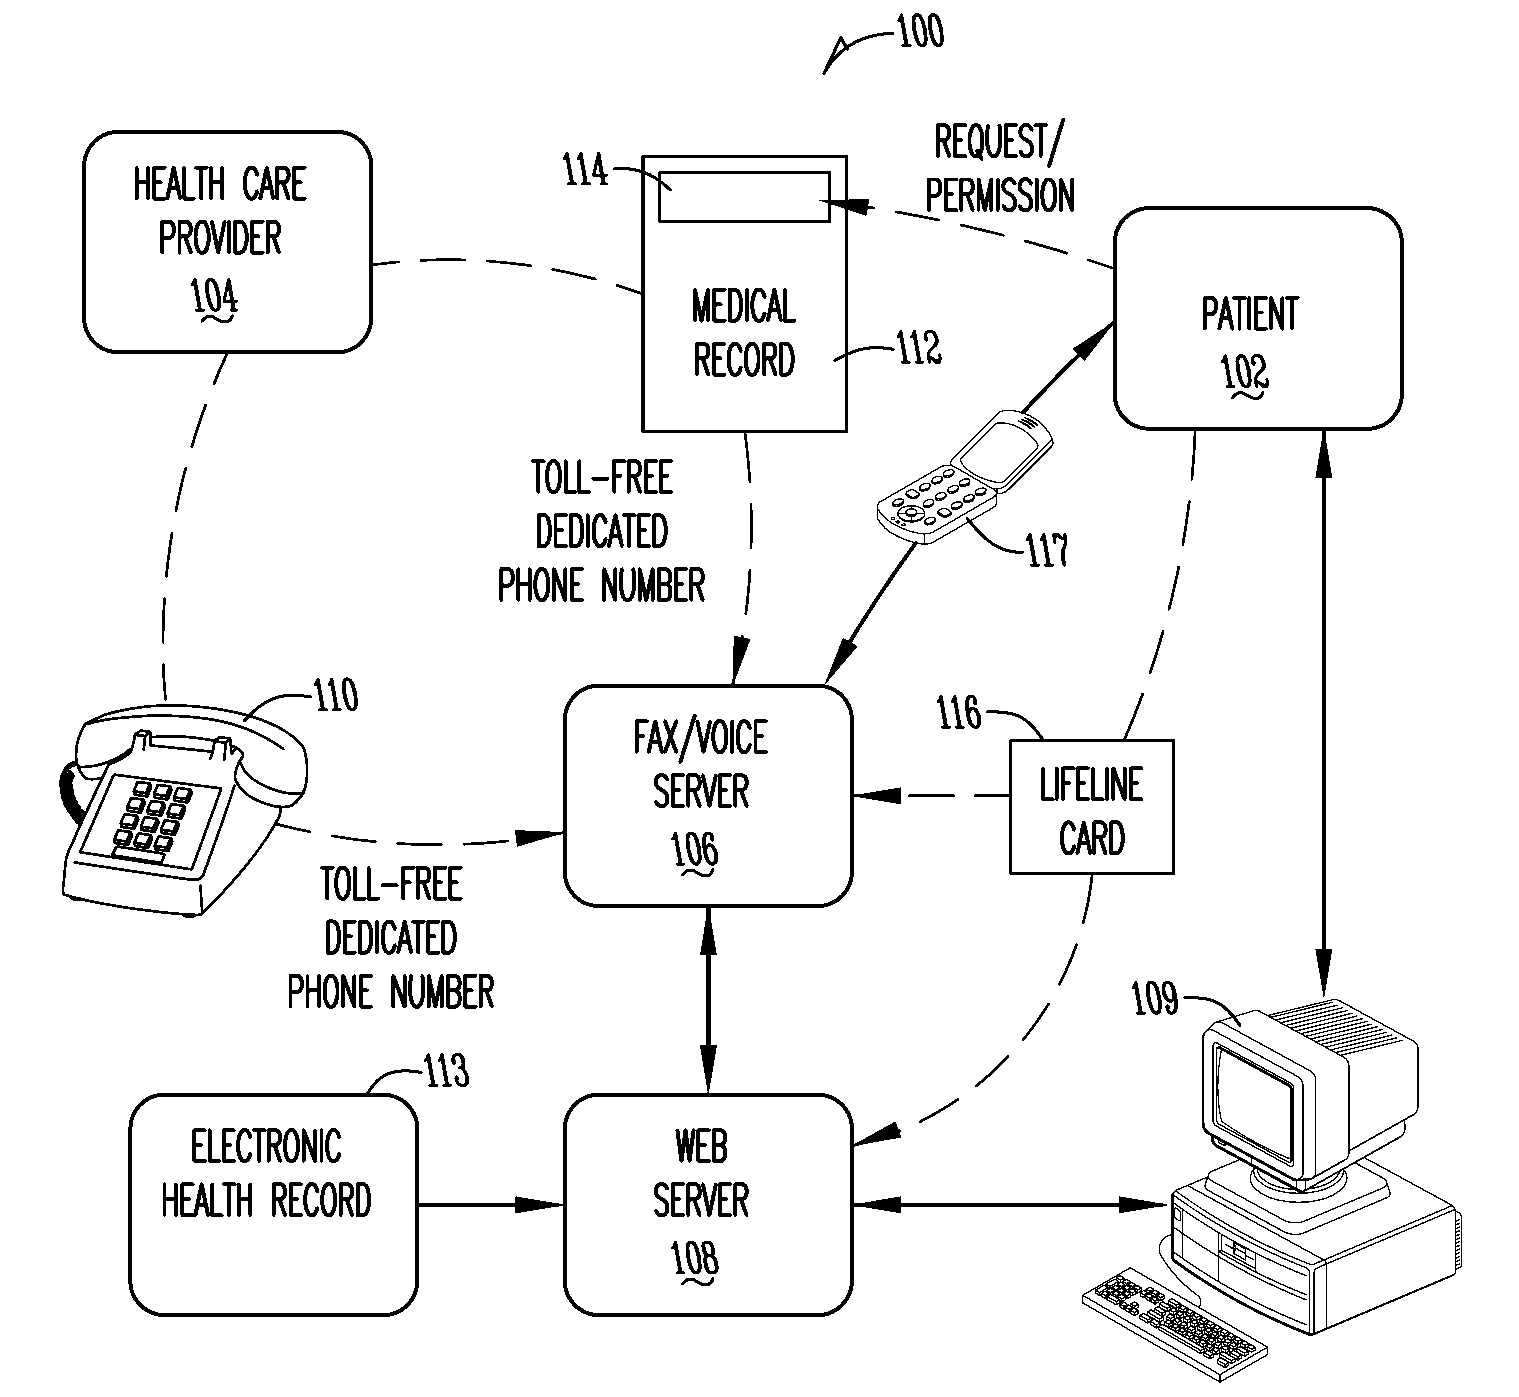 Method and system for providing online medical records with emergency password feature